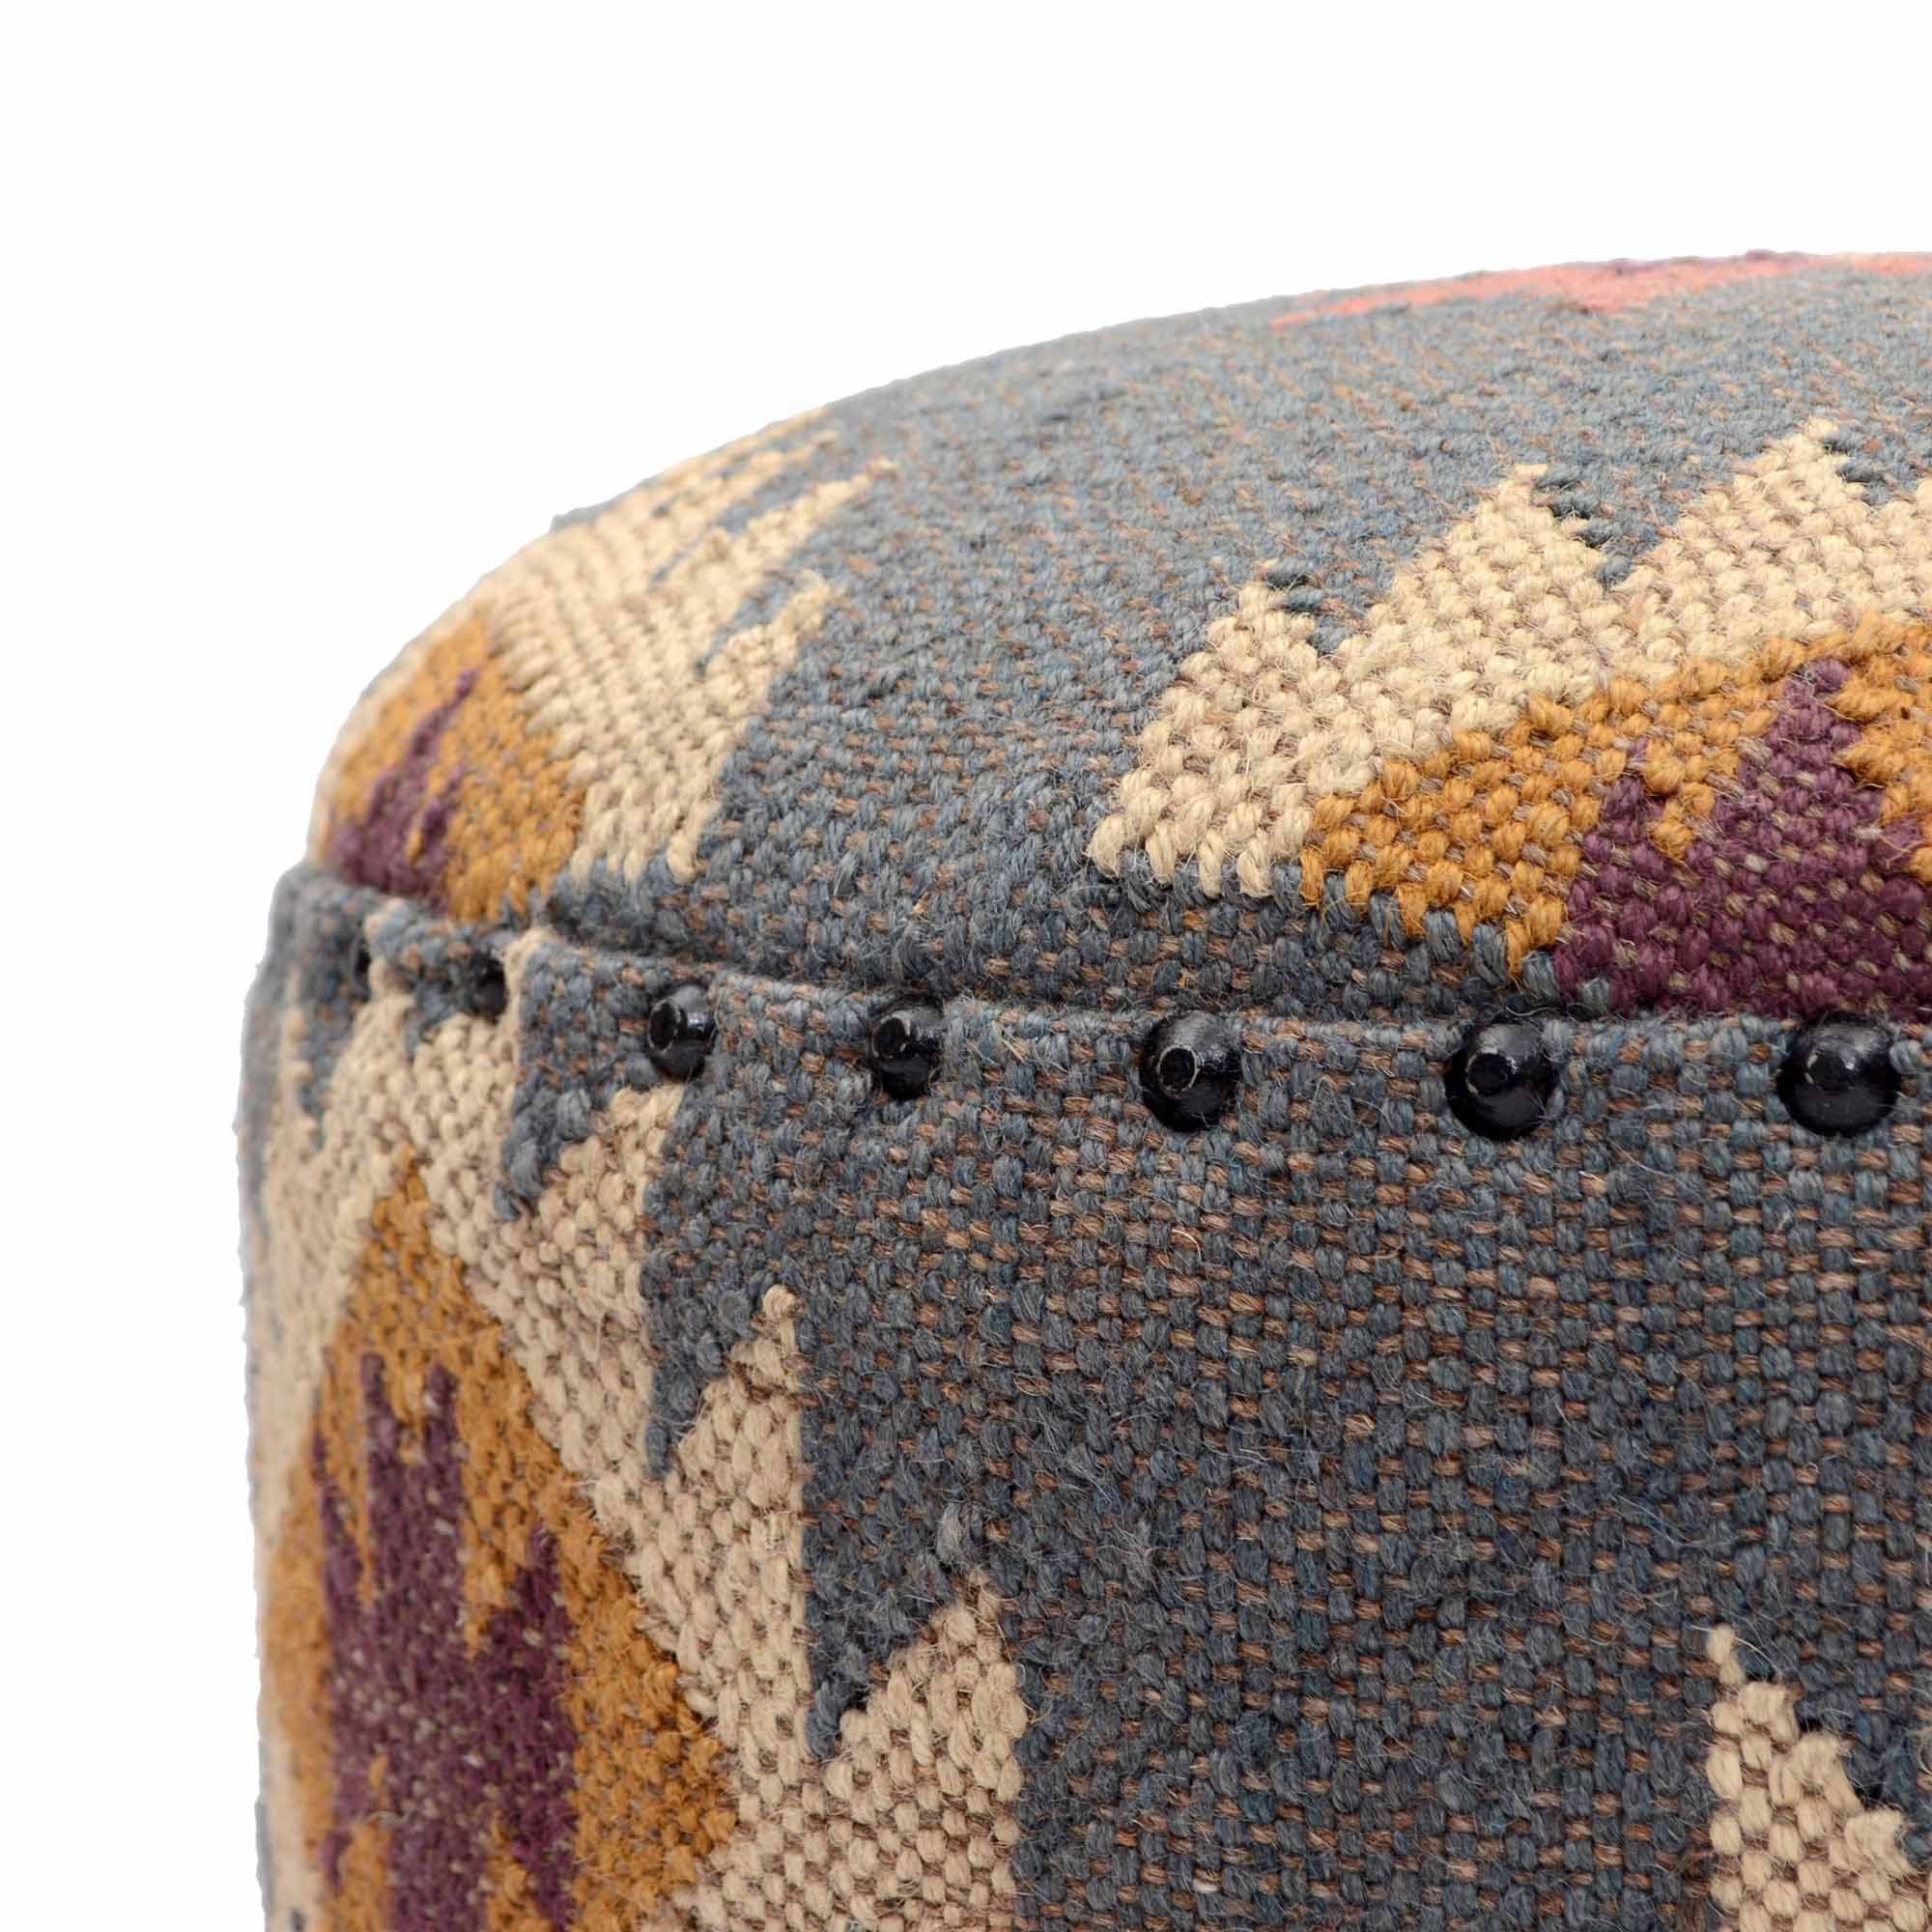 NATURAL FURNISH Handmade Kilim Jute Pouf Ottomans Wooden Seating Stool for Living Room, Bedroom (16" D x 16" W x 16" H) (Grey)